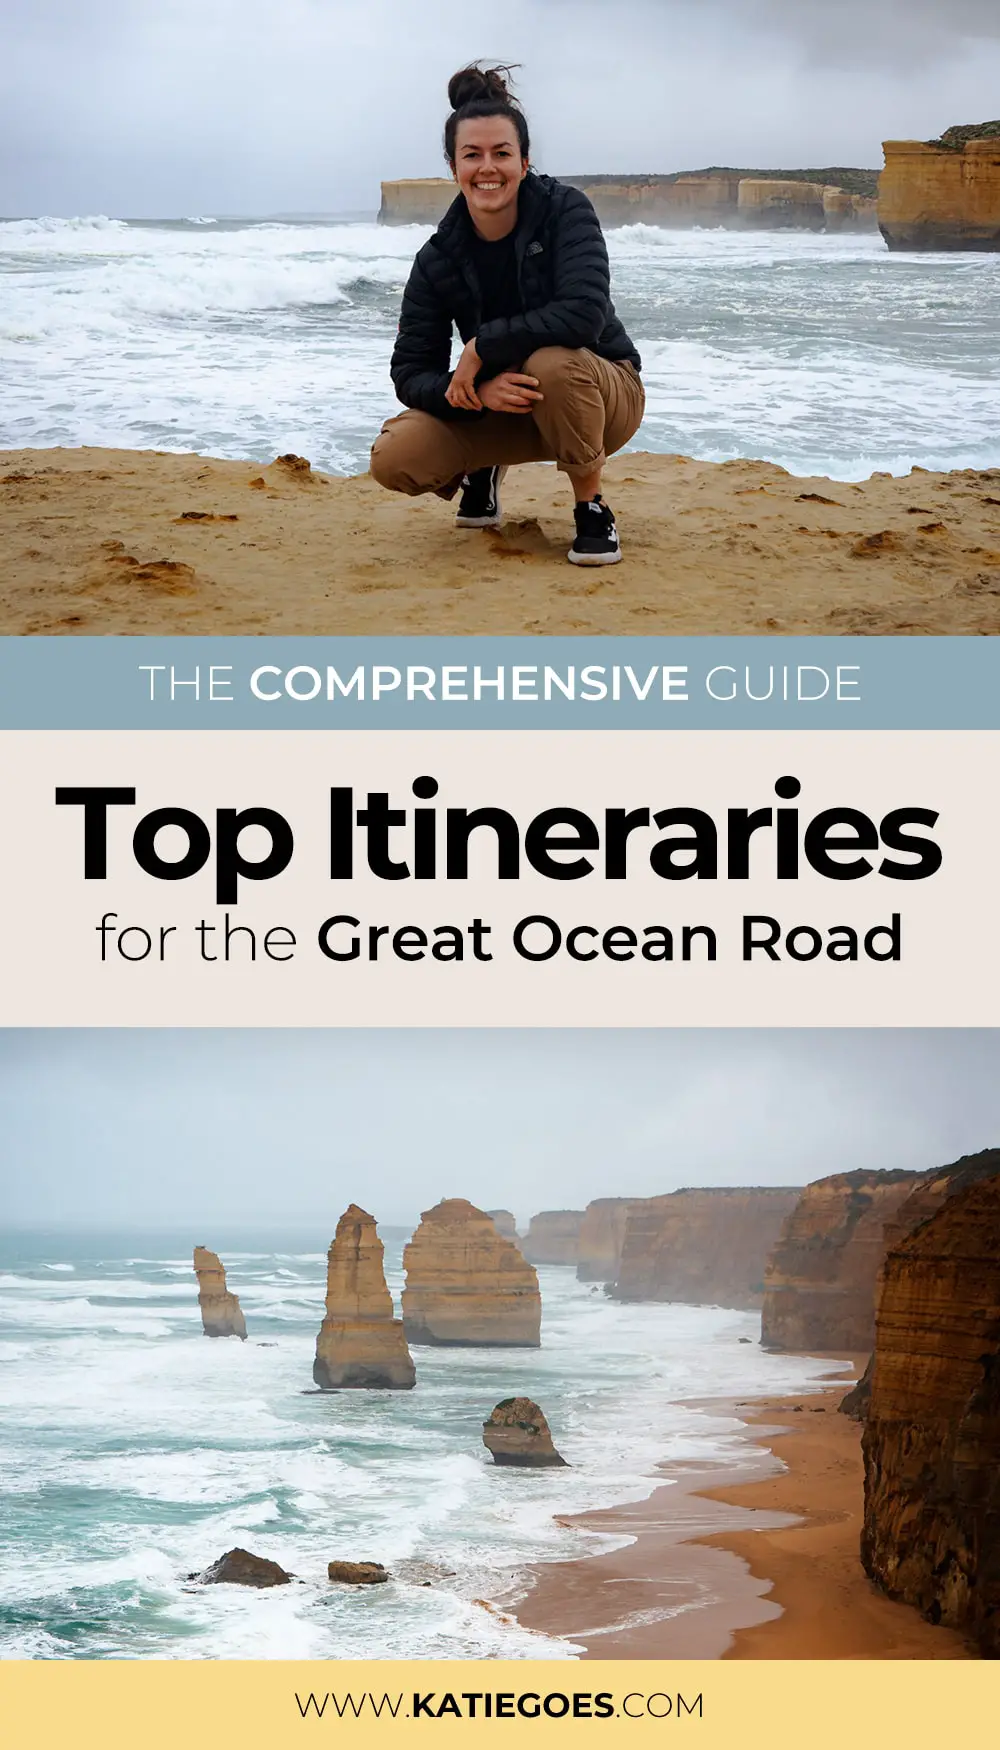 Top Itineraries for the Great Ocean Road